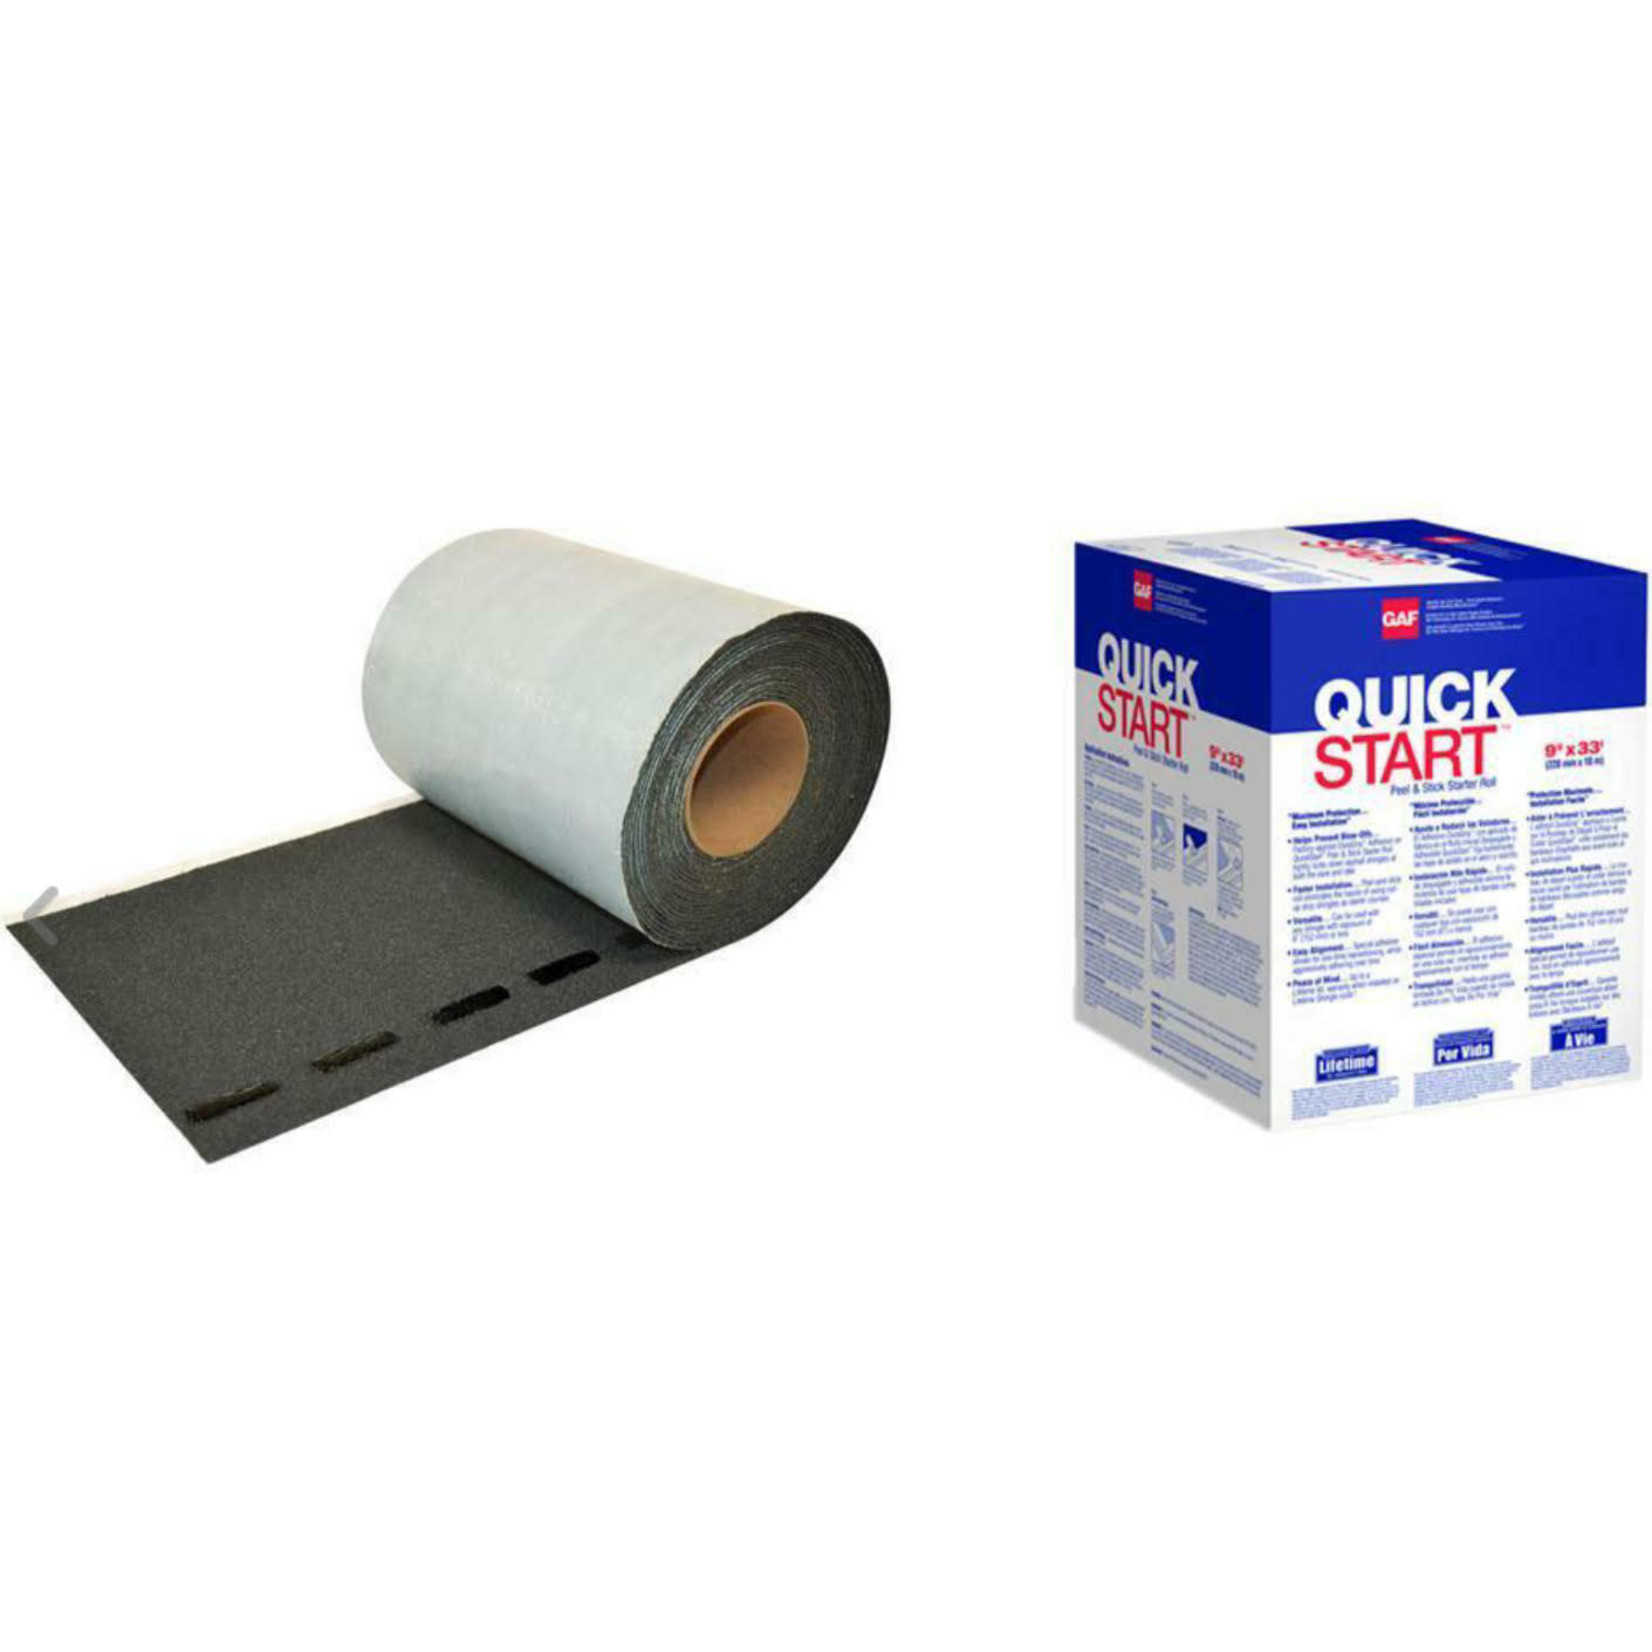 11736 Quick Start Peel and Stick Roll